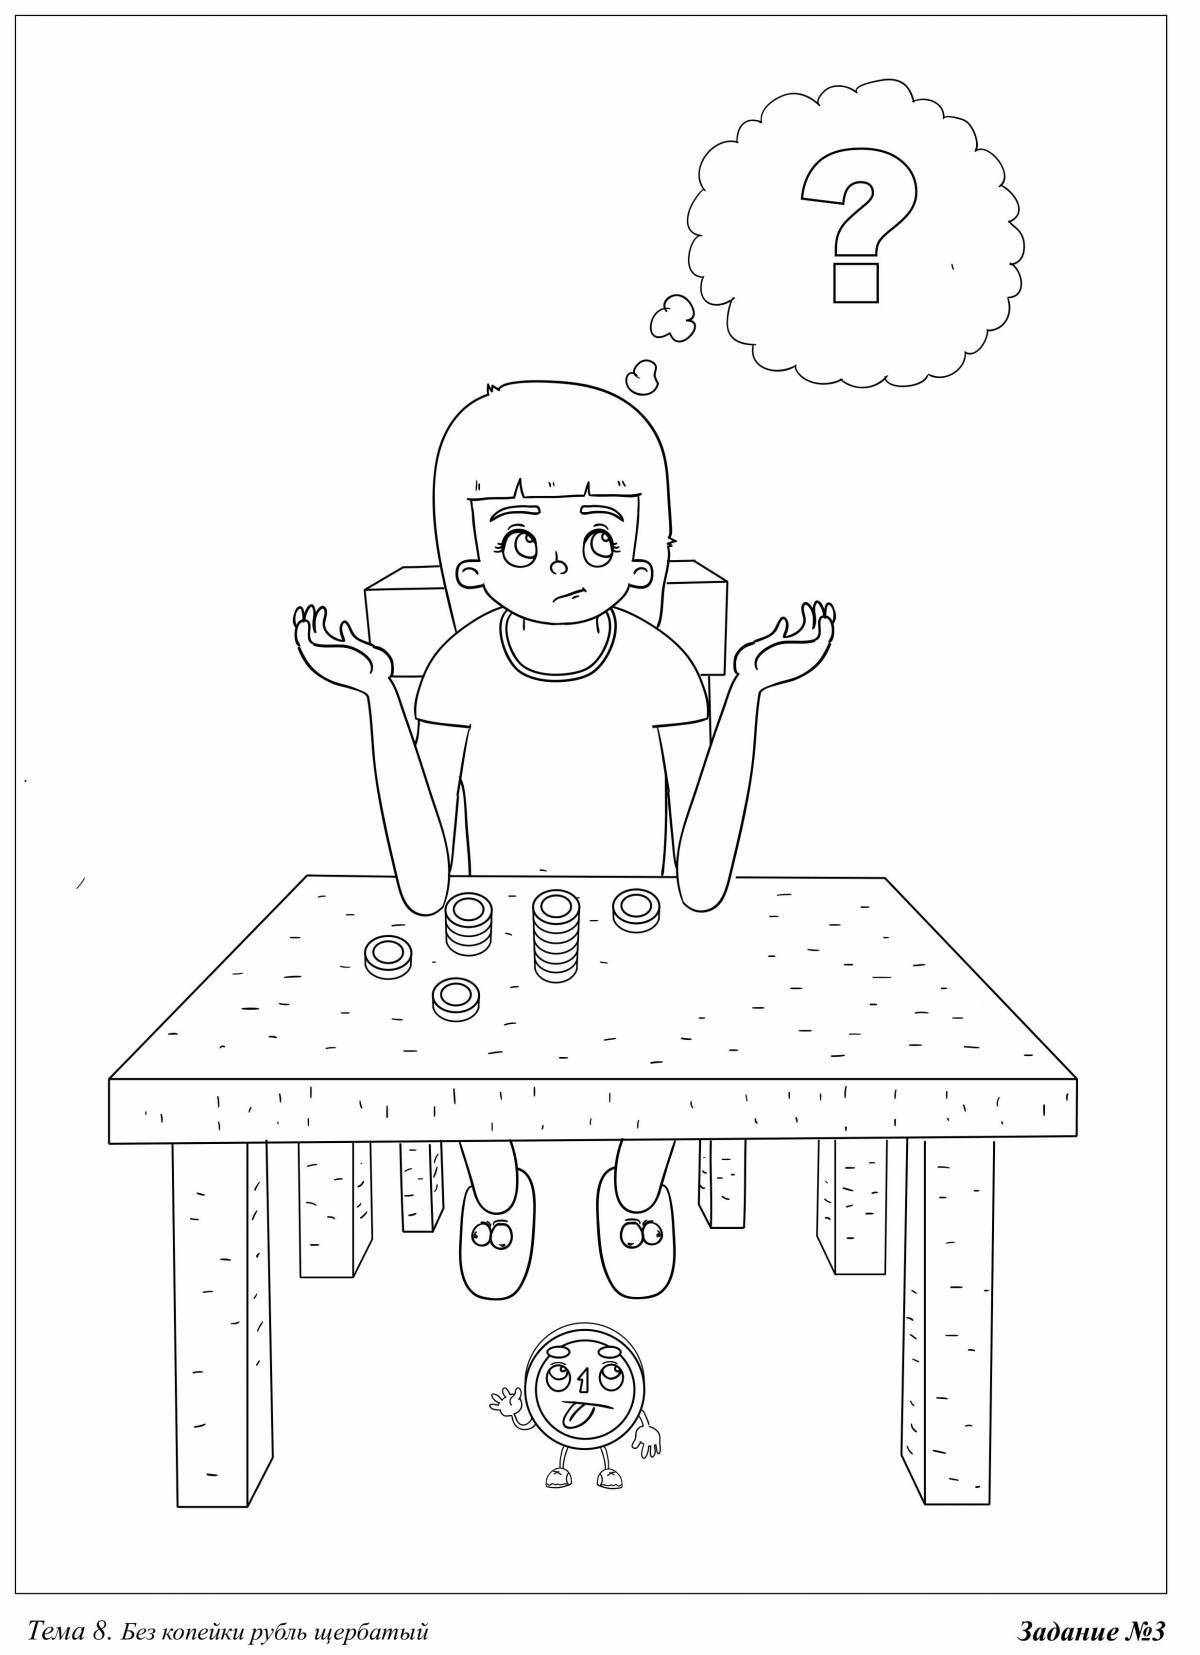 Fun financial literacy coloring book for kids